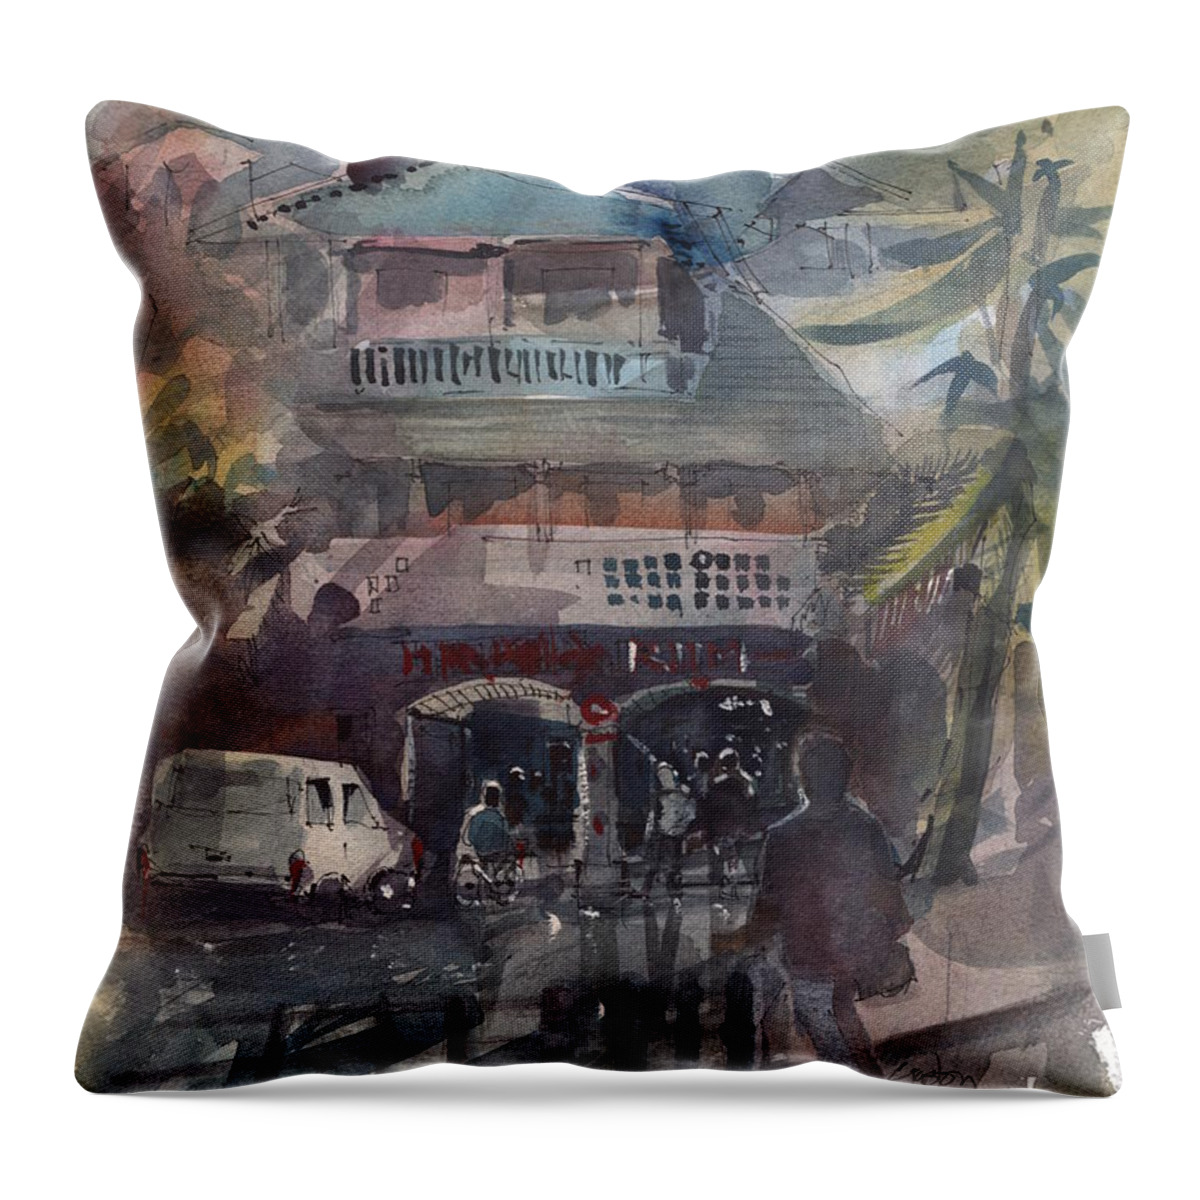  Throw Pillow featuring the painting Island dream by Gaston McKenzie